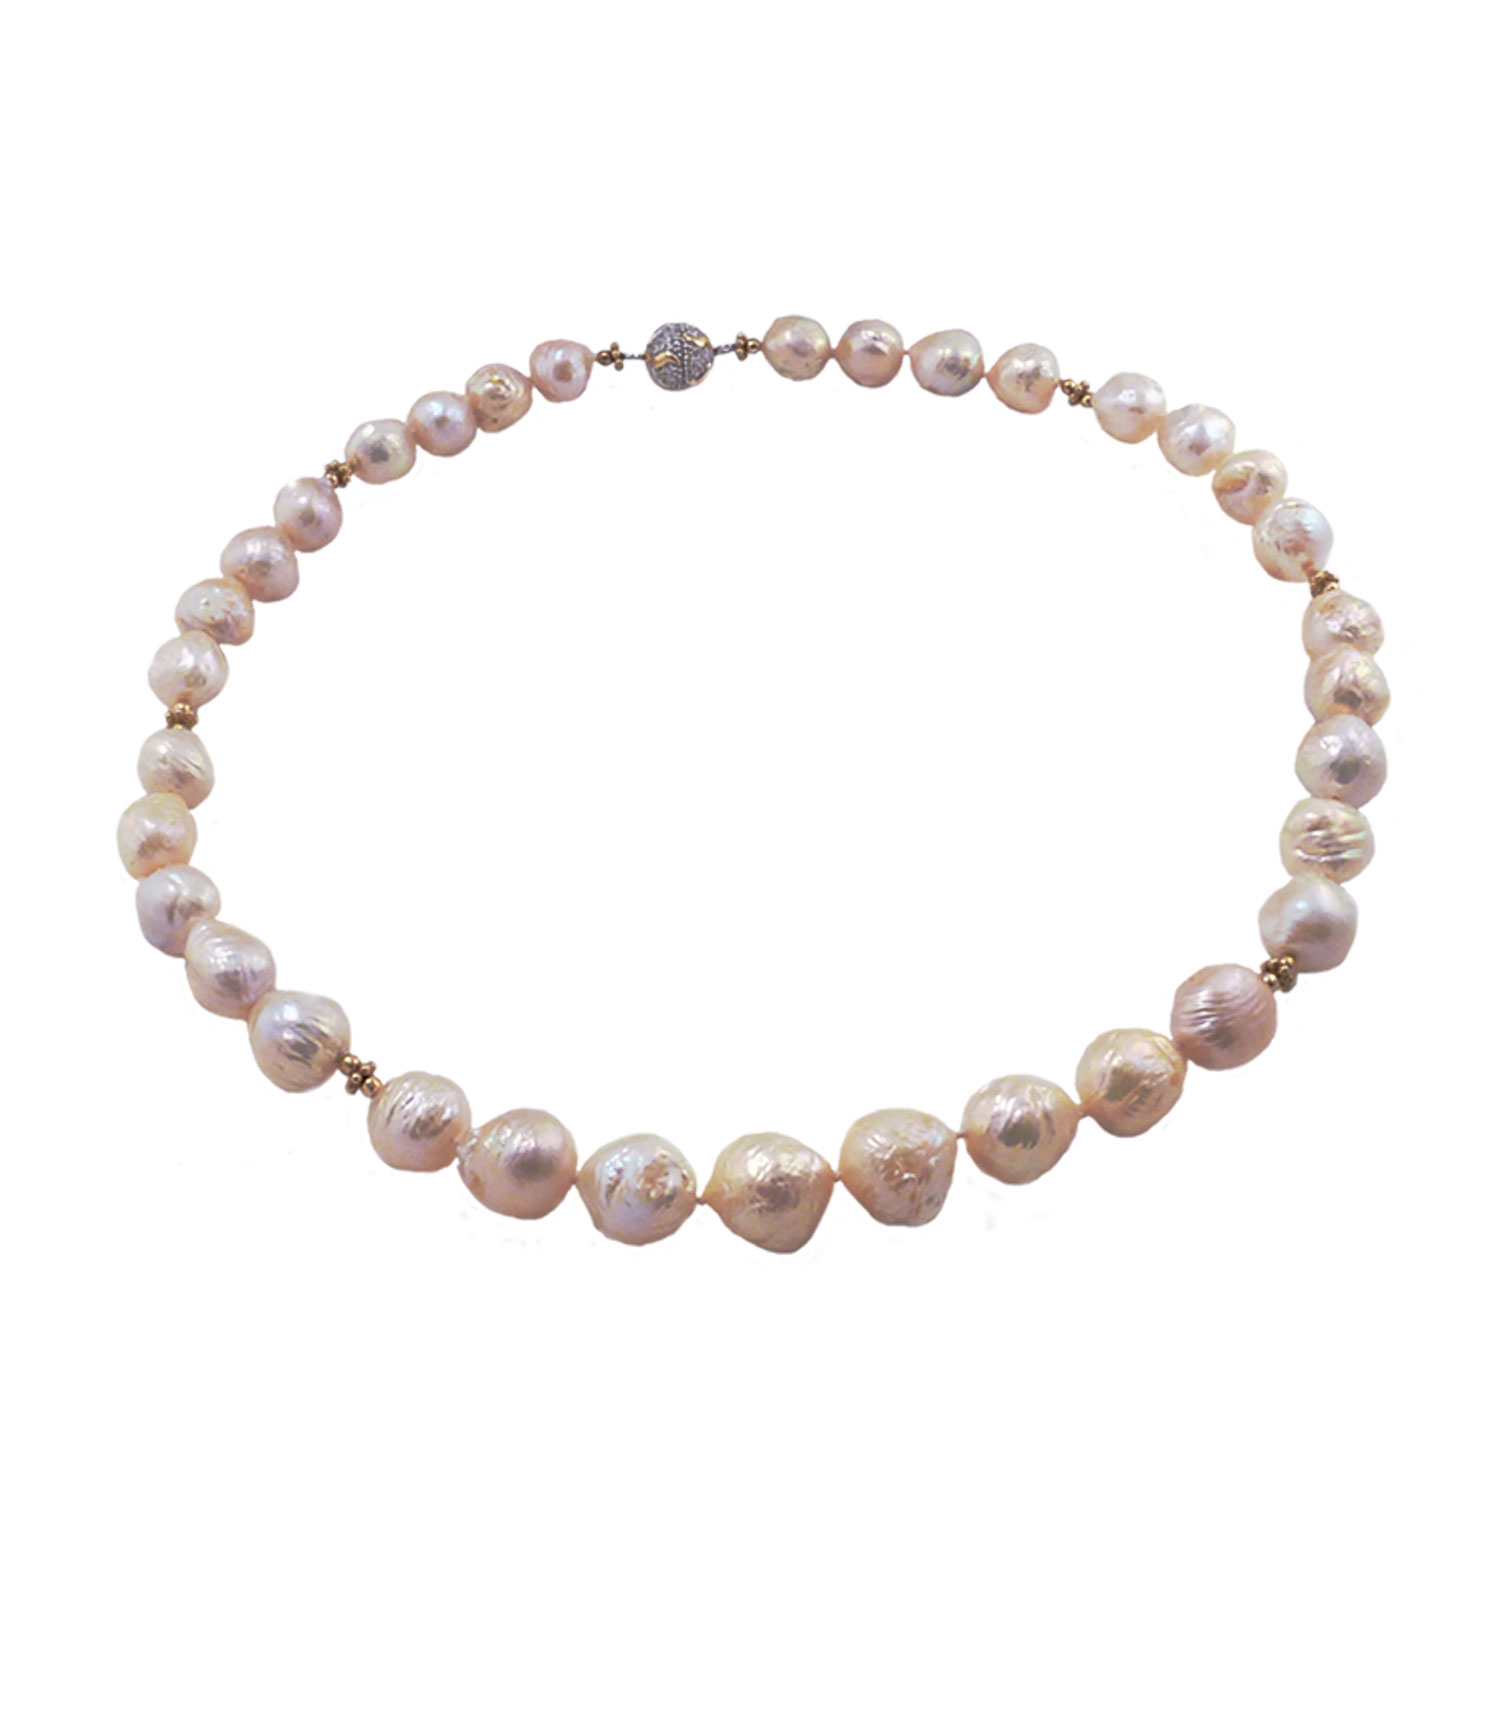 Pearl necklace Chinese Kasumi pink pearls. Modern pearl jewelry